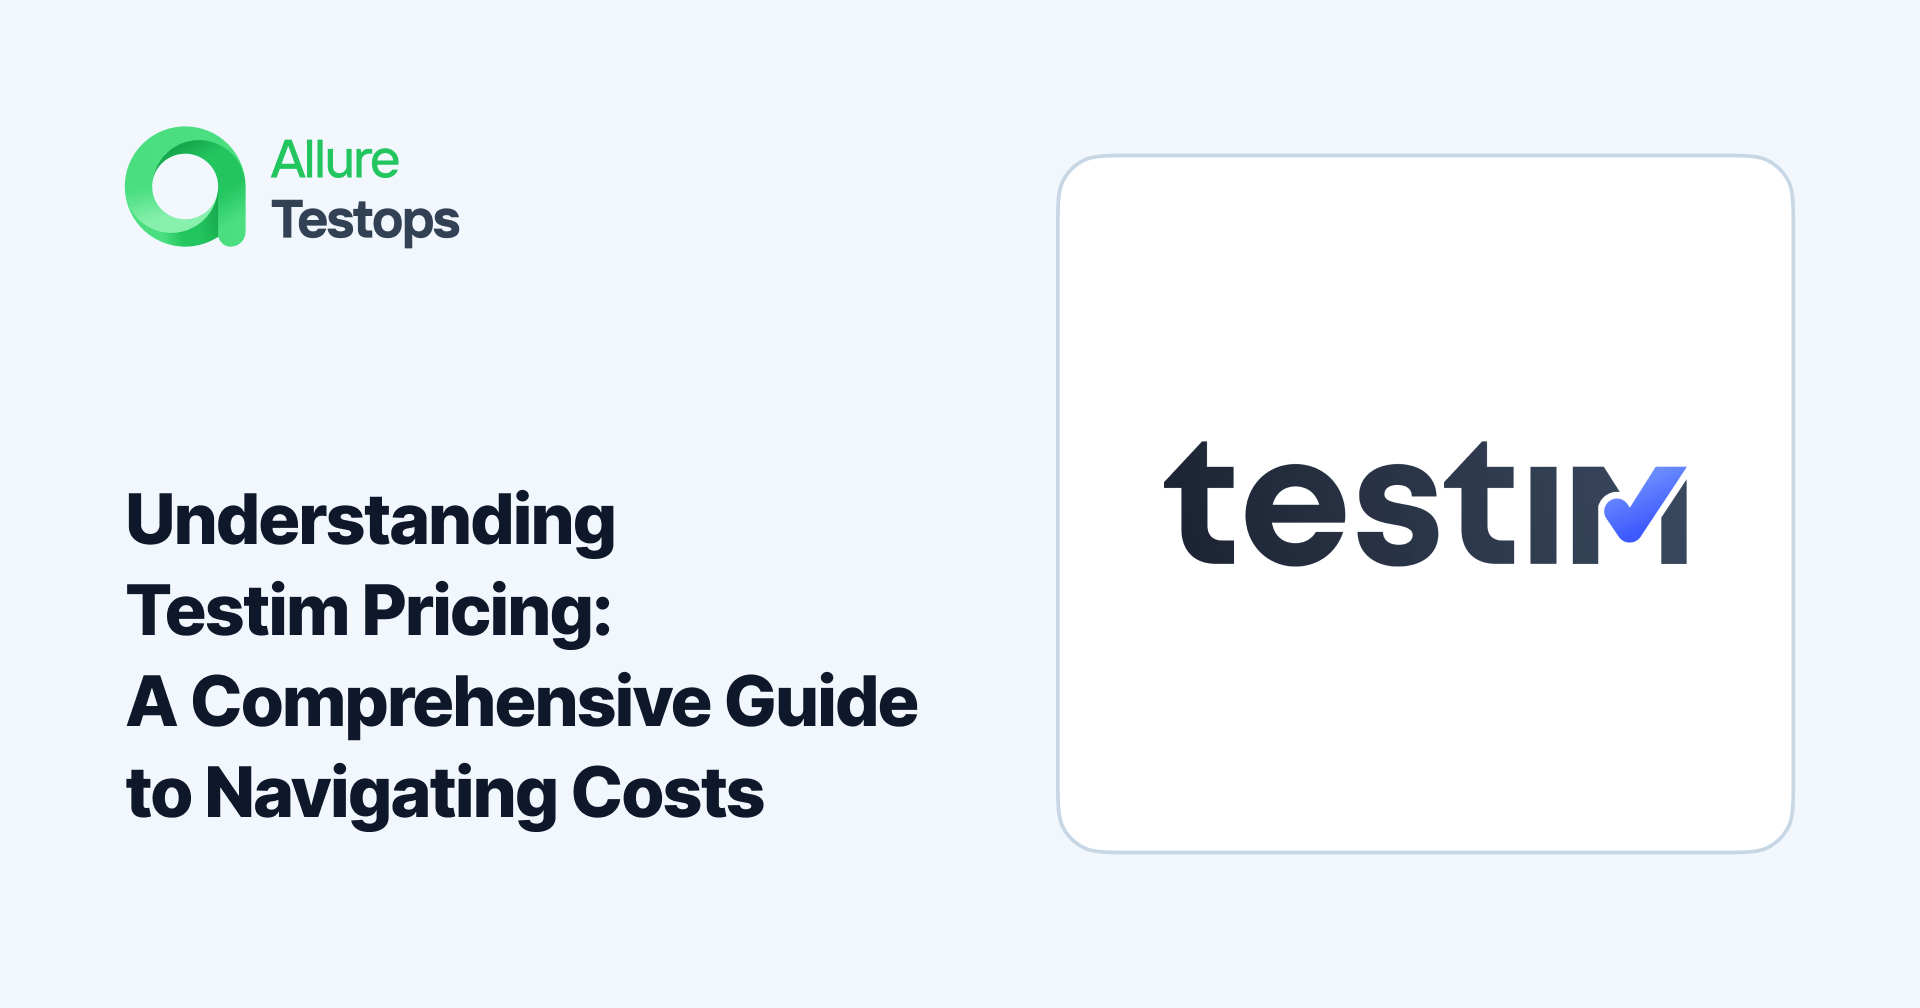 Understanding Testim Pricing: A Comprehensive Guide to Navigating Costs